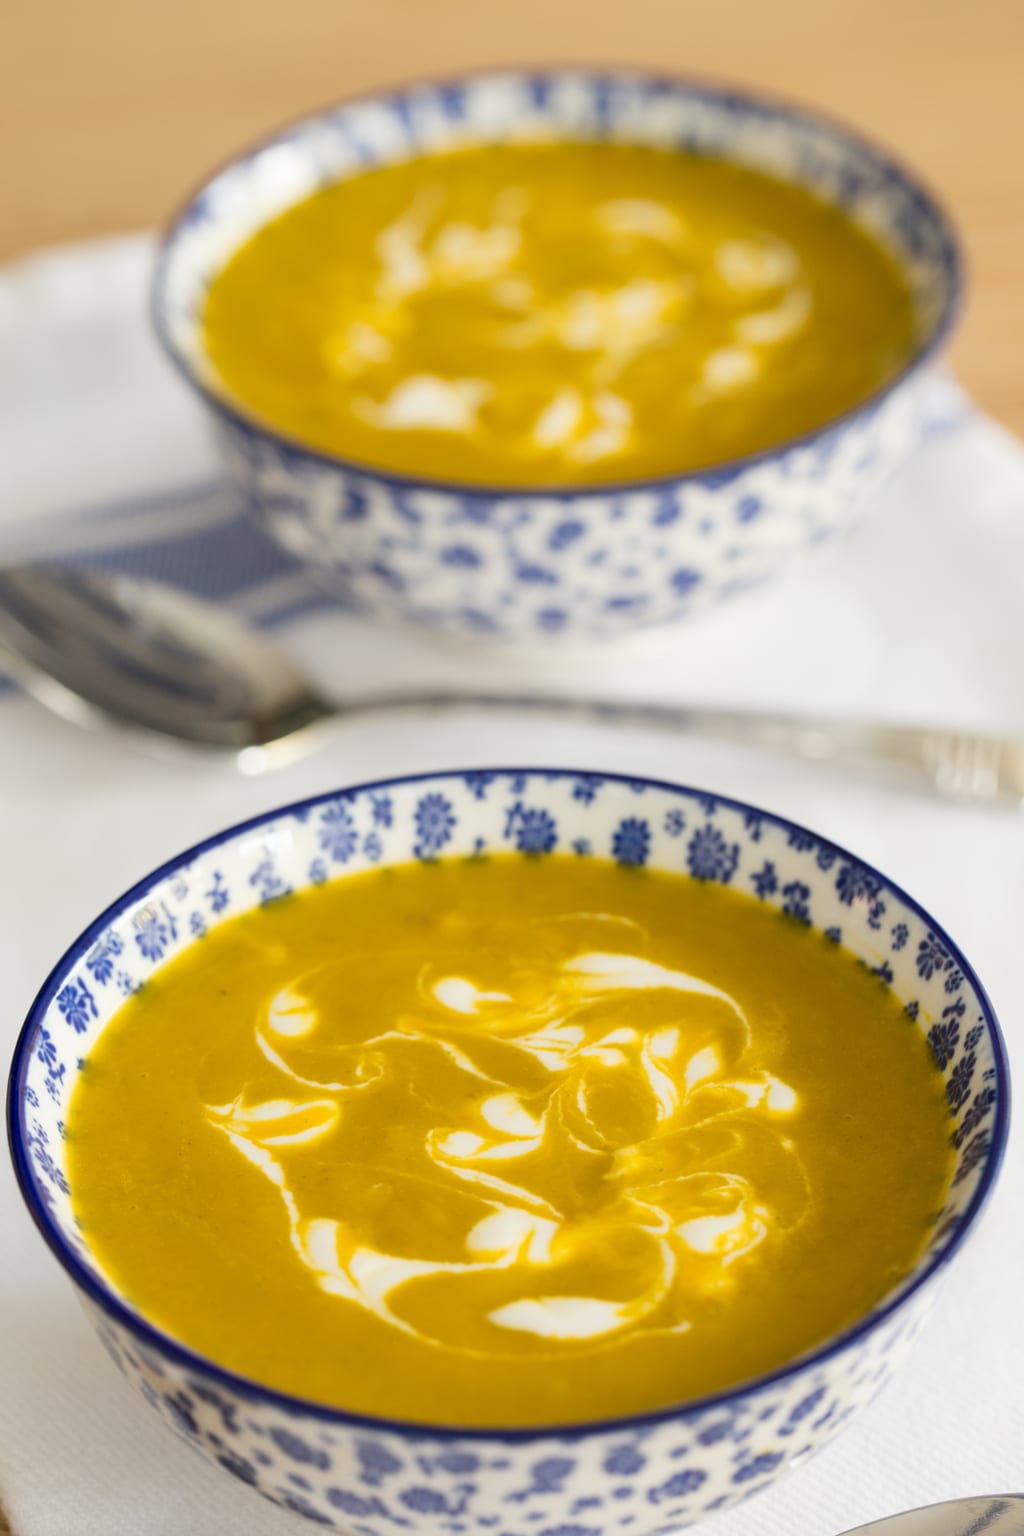 Photo of two blue and white patterned bowls of Carrot Coriander Soup.